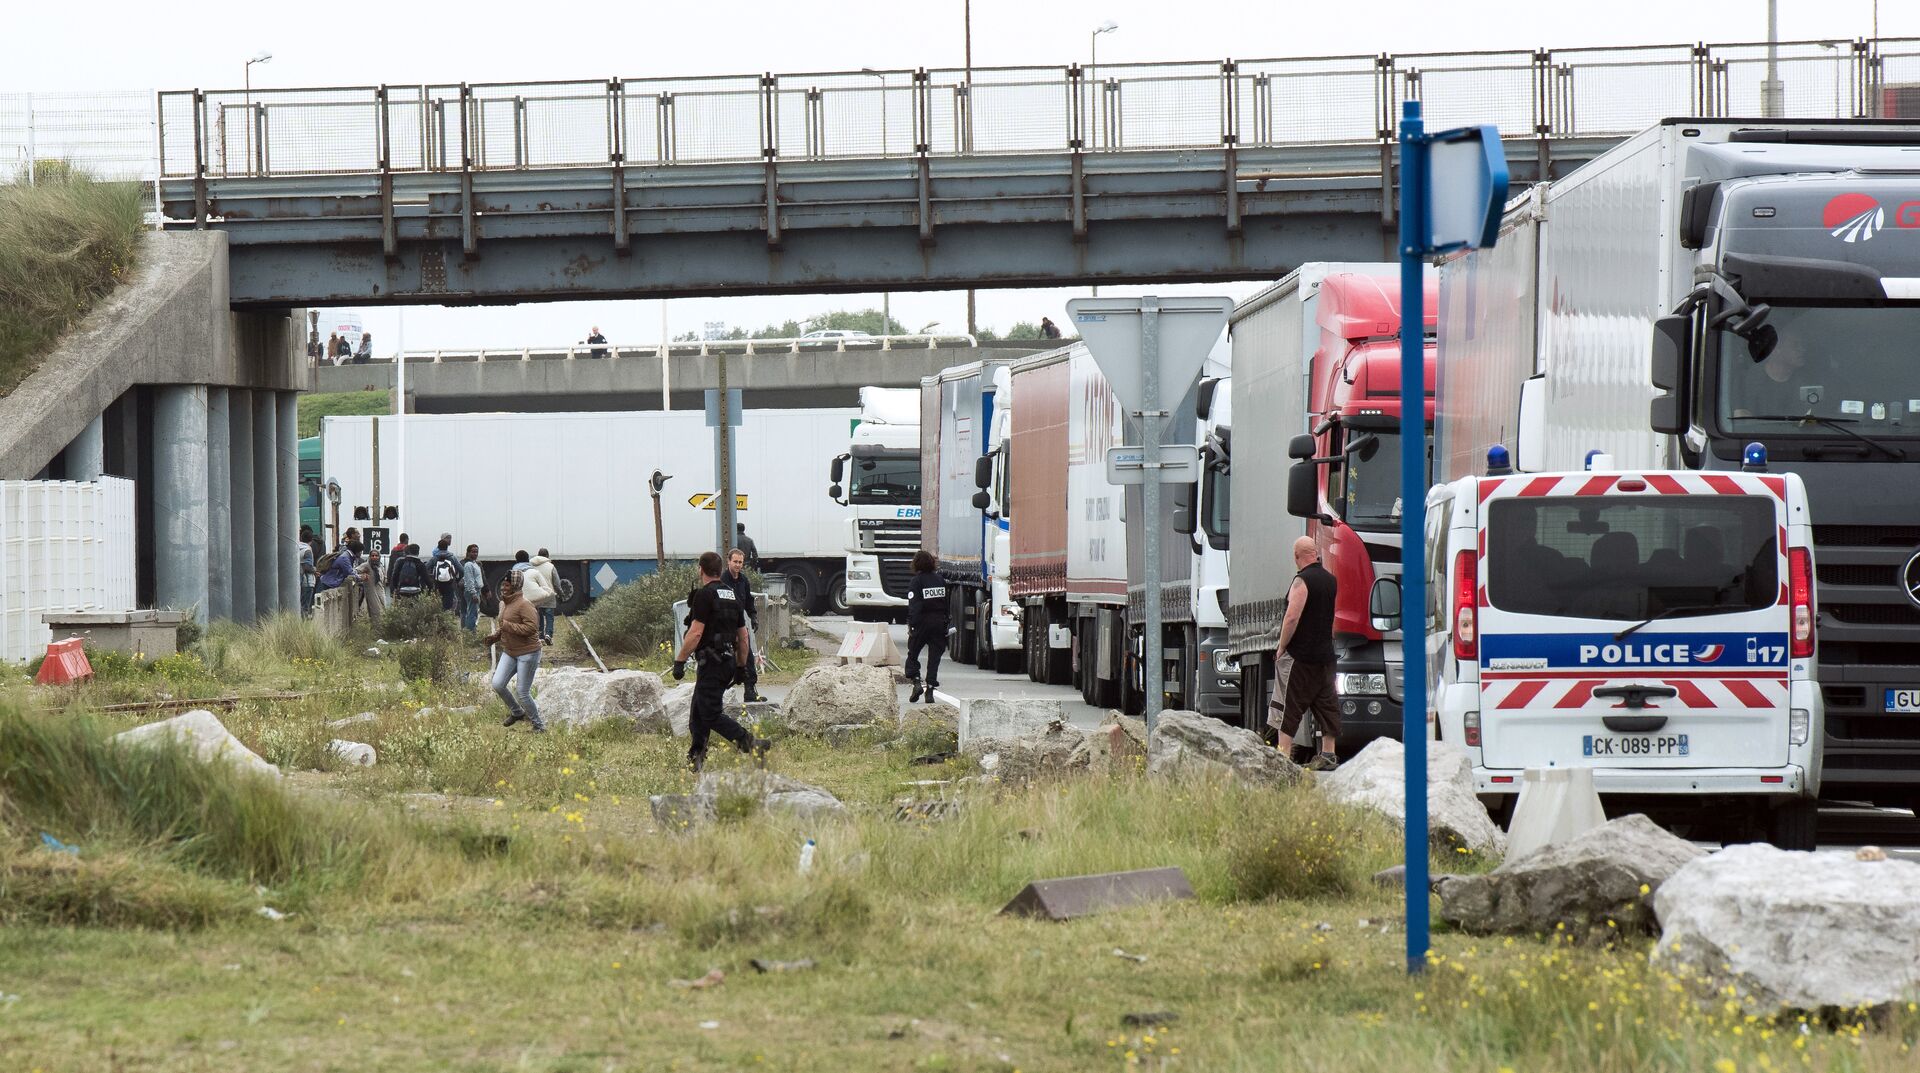 Policemen stand guard next to truck queuing to board a ferry to Great Britain to prevent migrants to reach the UK illegally, on September 10, 2014 in the French port of Calais - Sputnik International, 1920, 18.04.2022